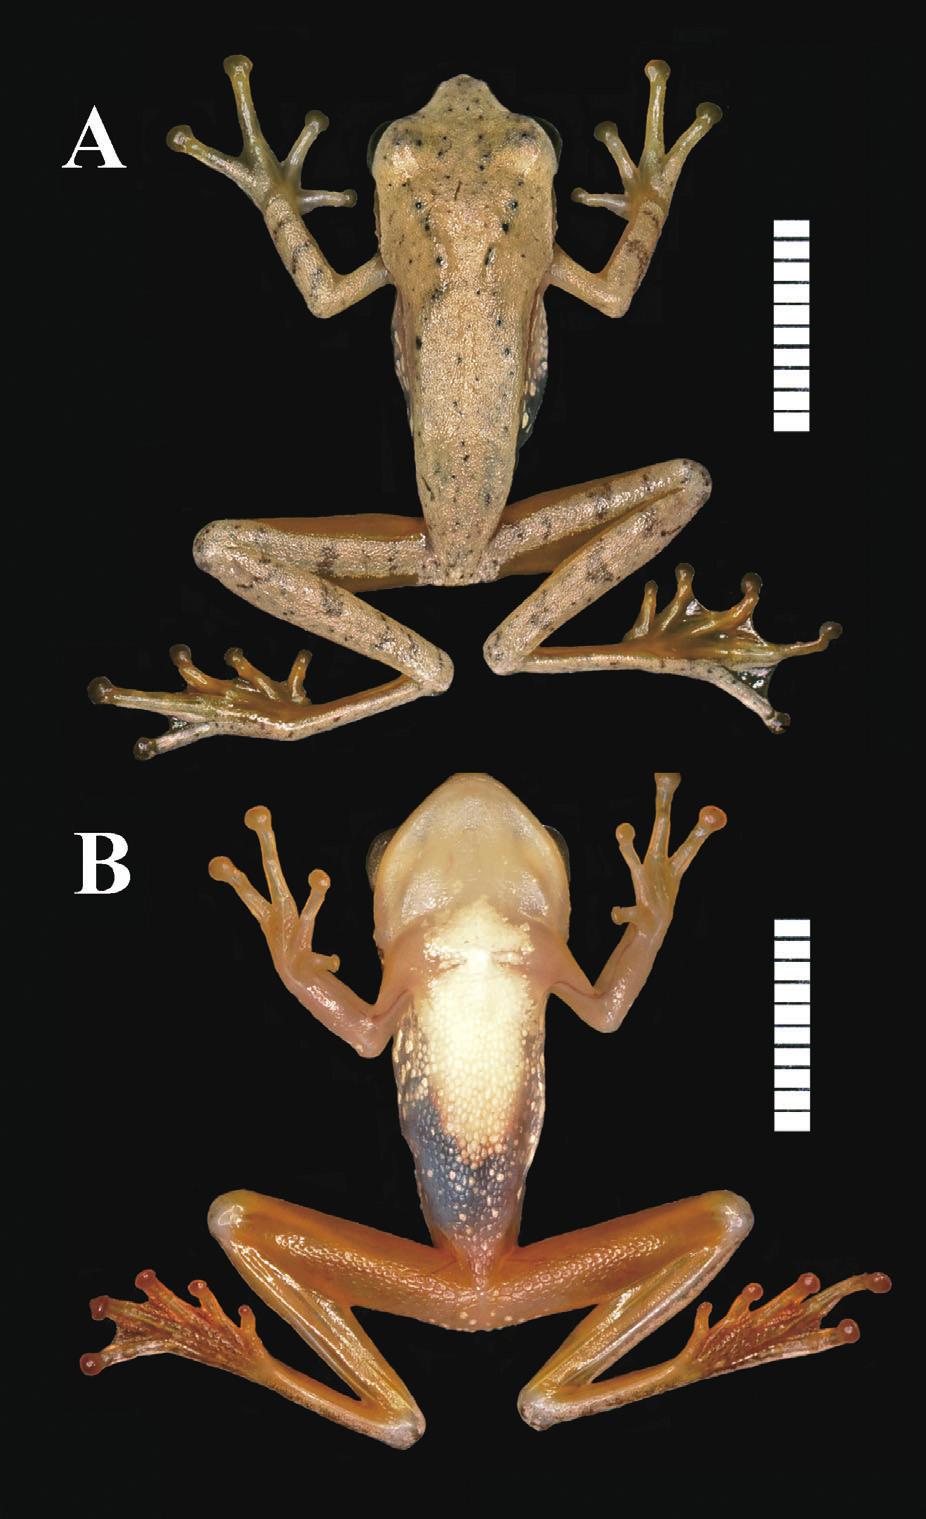 Scale bar in (B) = 10 mm, (A) not to scale. Fig. 3. (A) Dorsal and (B) ventral views of female holotype (KUHE 35084) of Gracixalus seesom sp. nov. in anesthetized state.